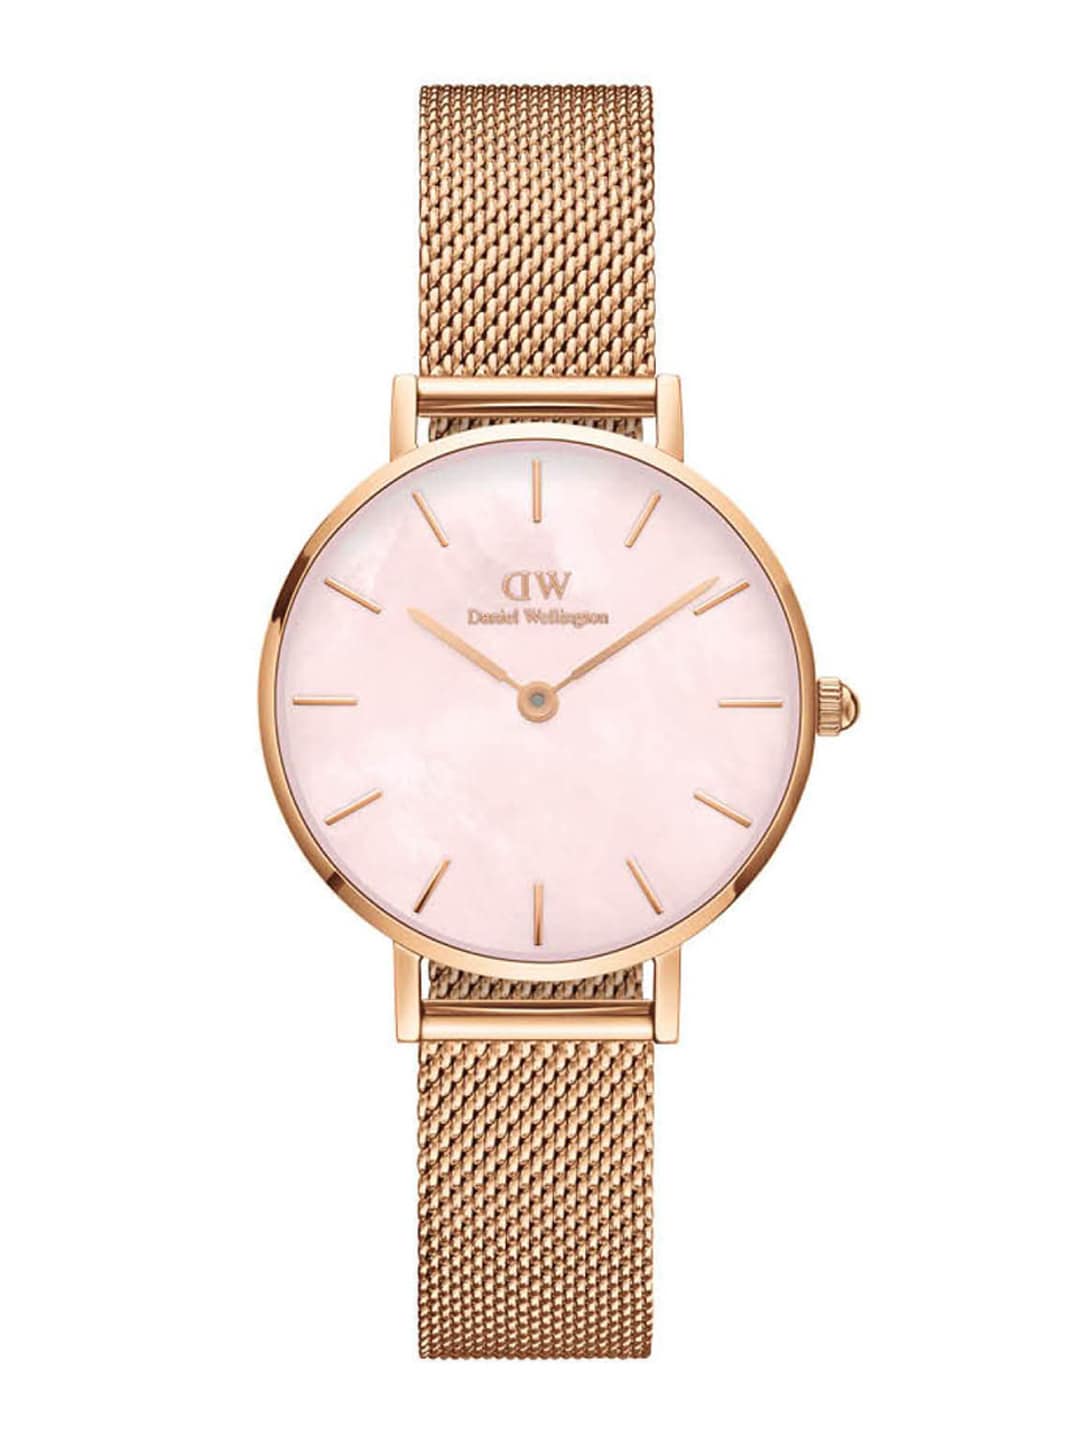 Daniel Wellington Women Beige Dial & Rose Gold-Plated Straps Watch DW00100513 Price in India